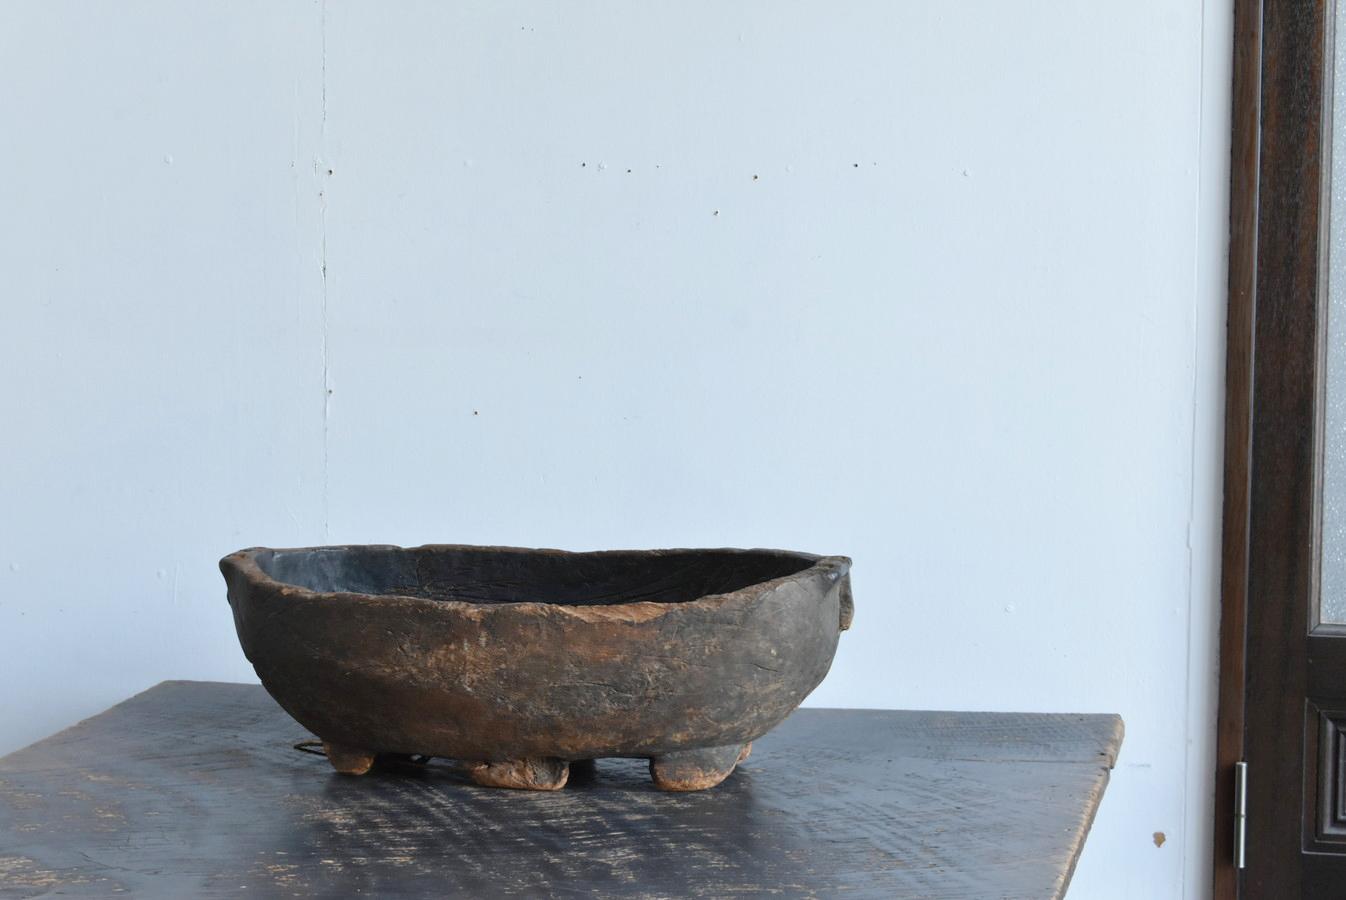 Rustic Old Wooden Bowl from Southeast Asia / a Hollow Container 13